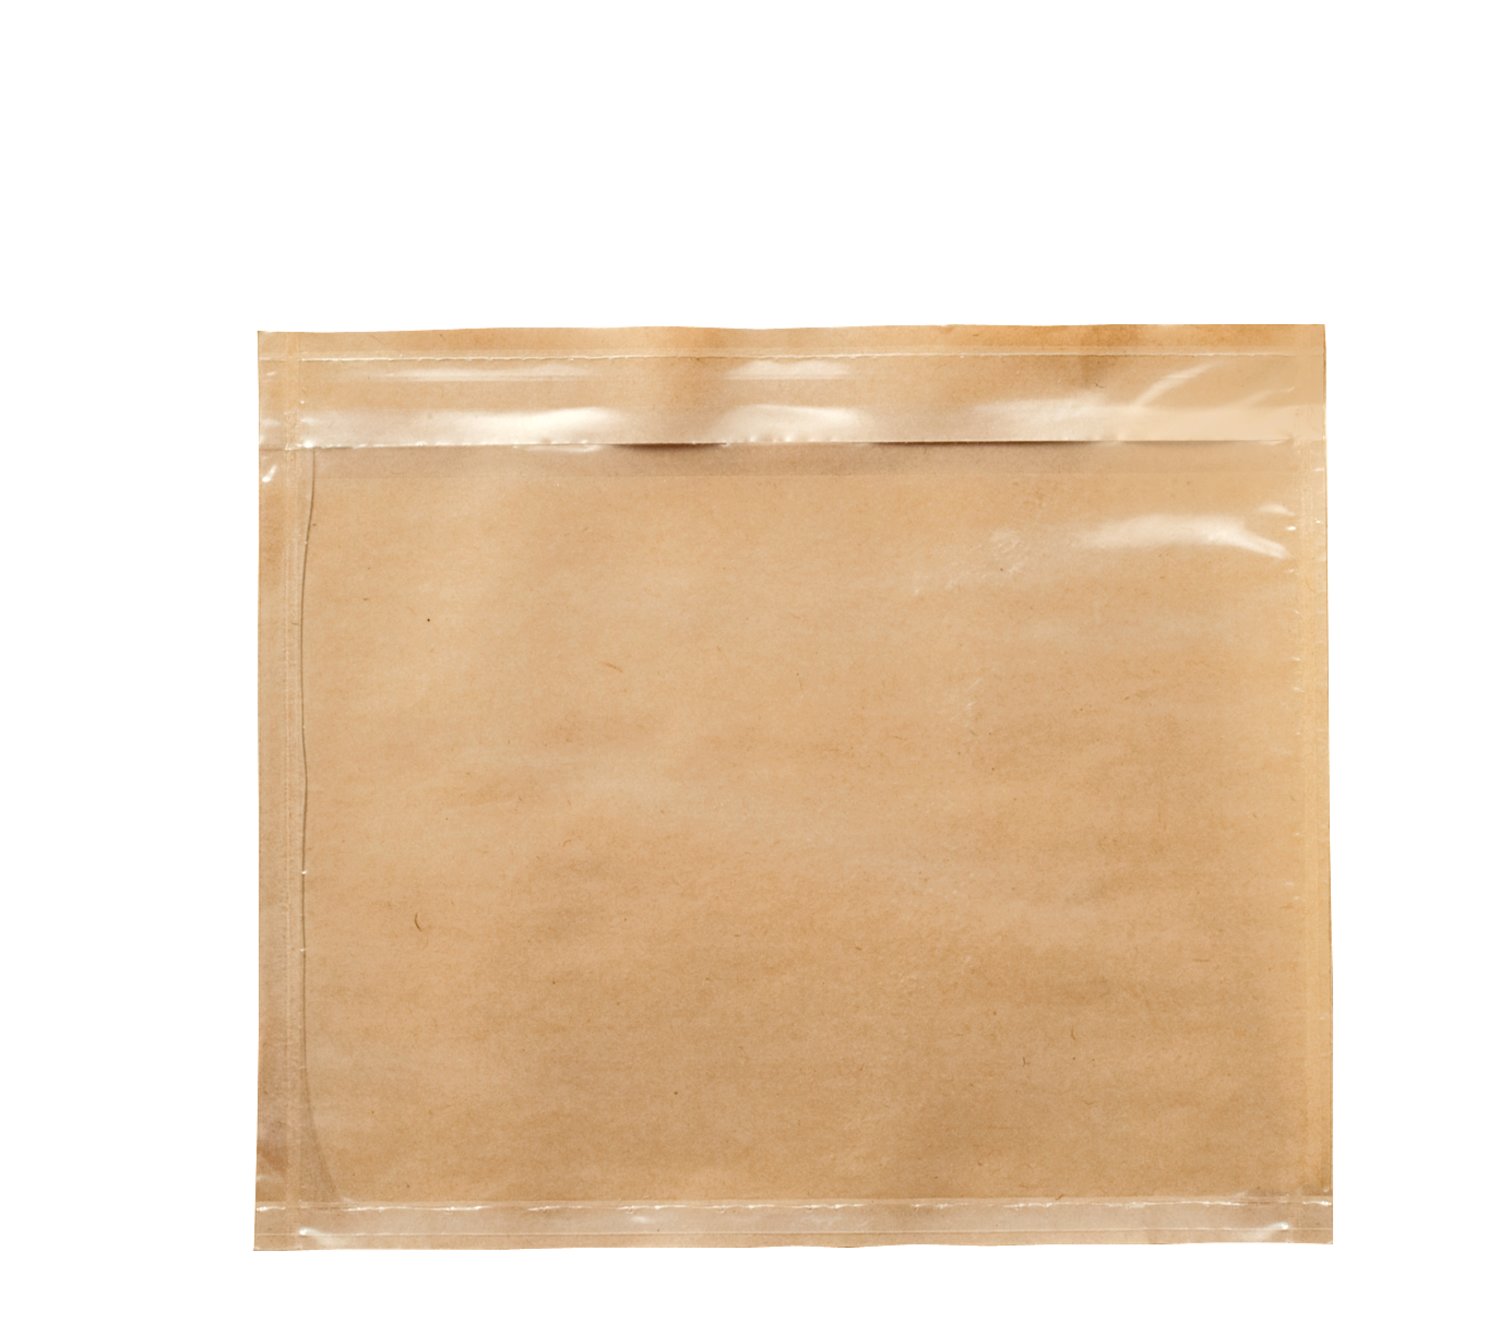 7010373283 - 3M Non-Printed Packing List Envelope NP9, 7 in x 6 in, 1000/Case